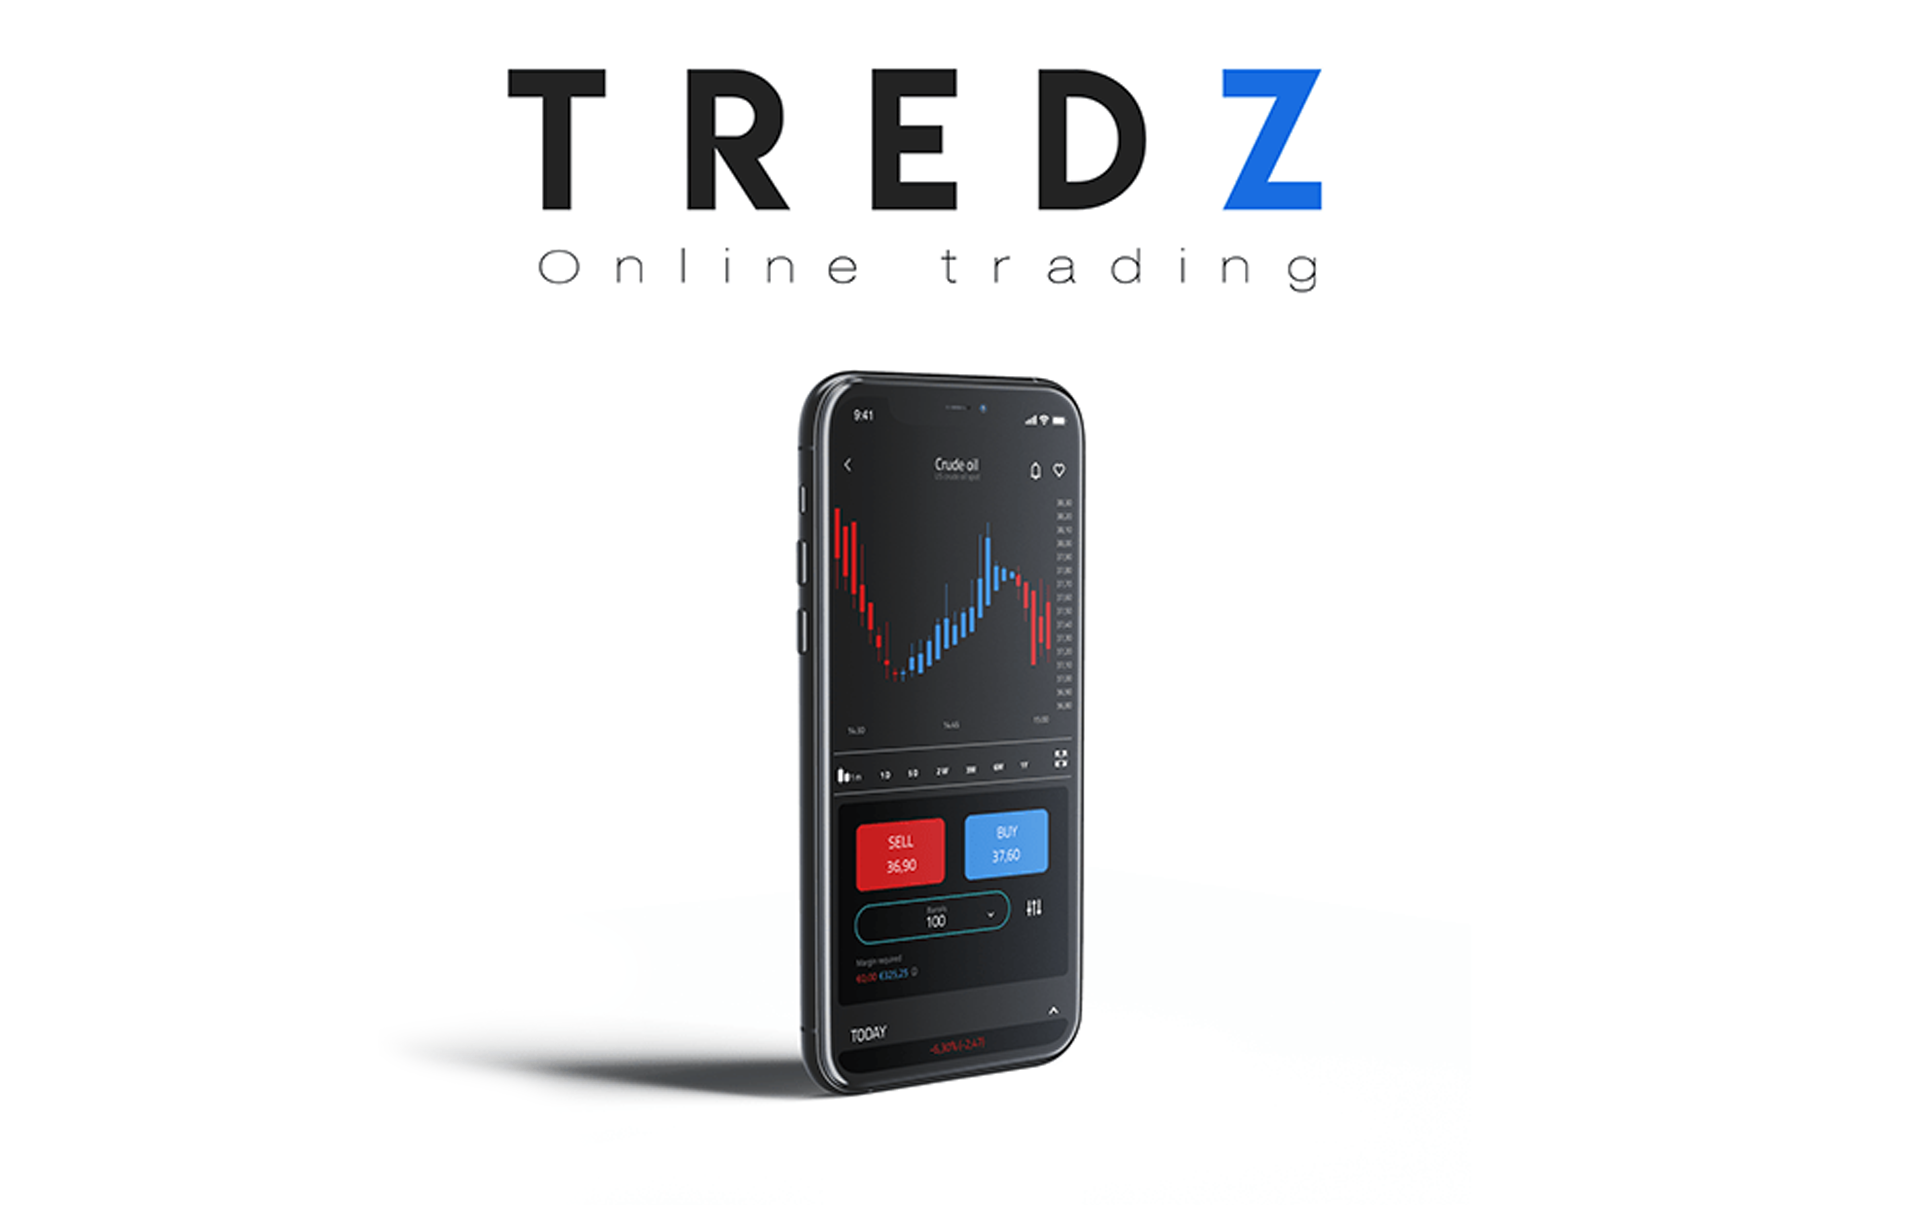 Tredz is a UX/UI project and this is its presentation image.